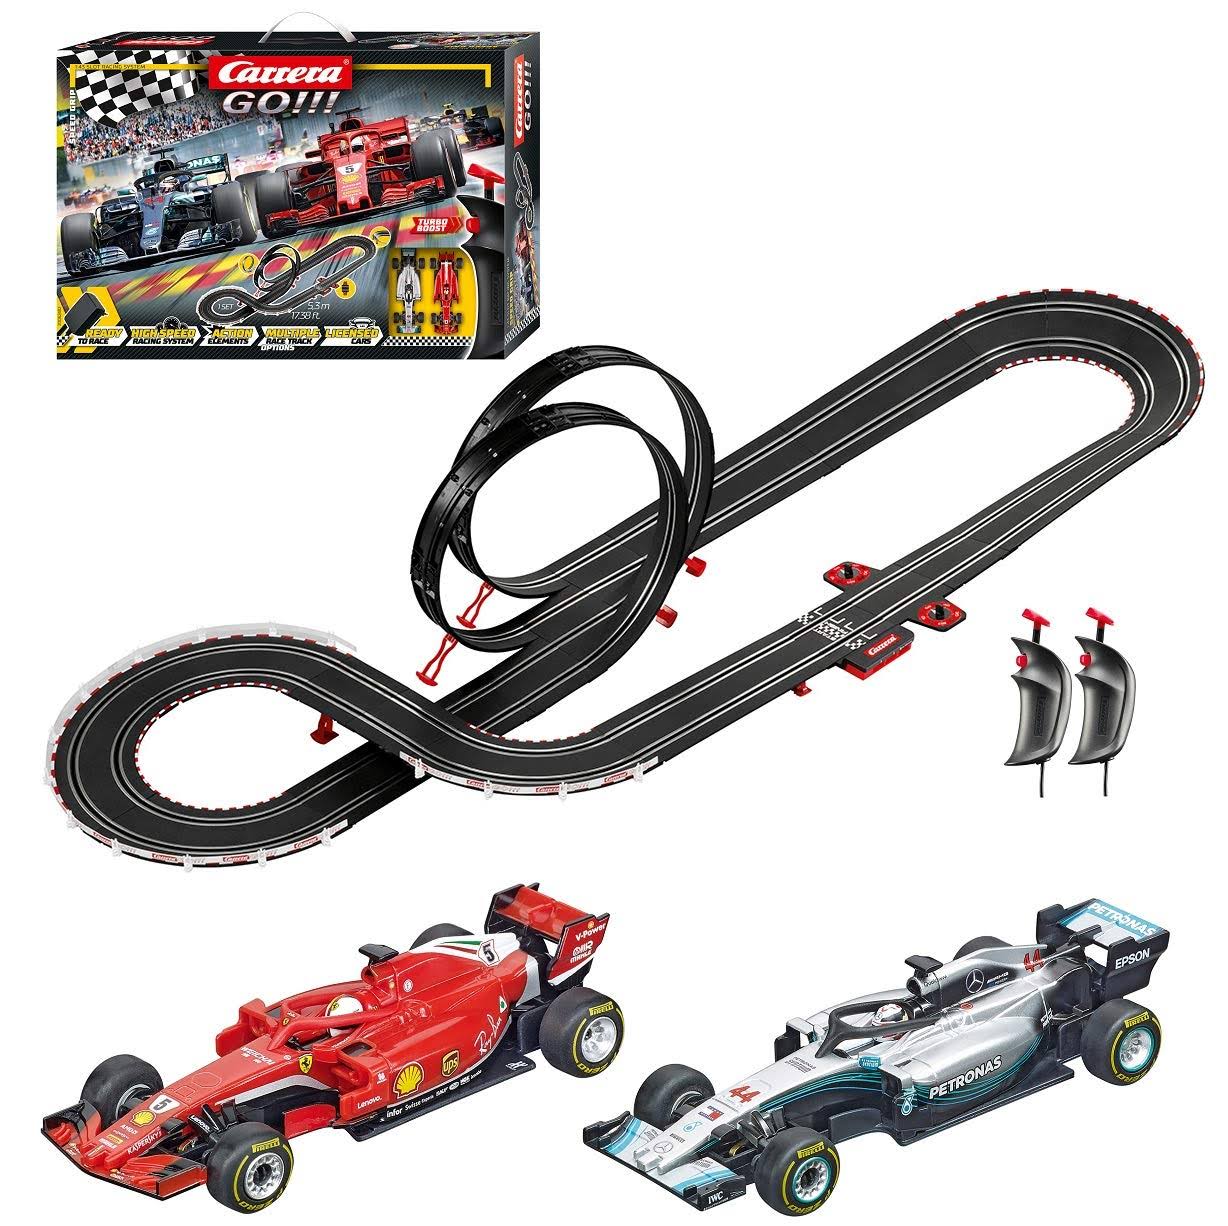 Carrera Go!!! 62482 Speed Grip Electric Slot Car Racing Track Set 1:43 Scale